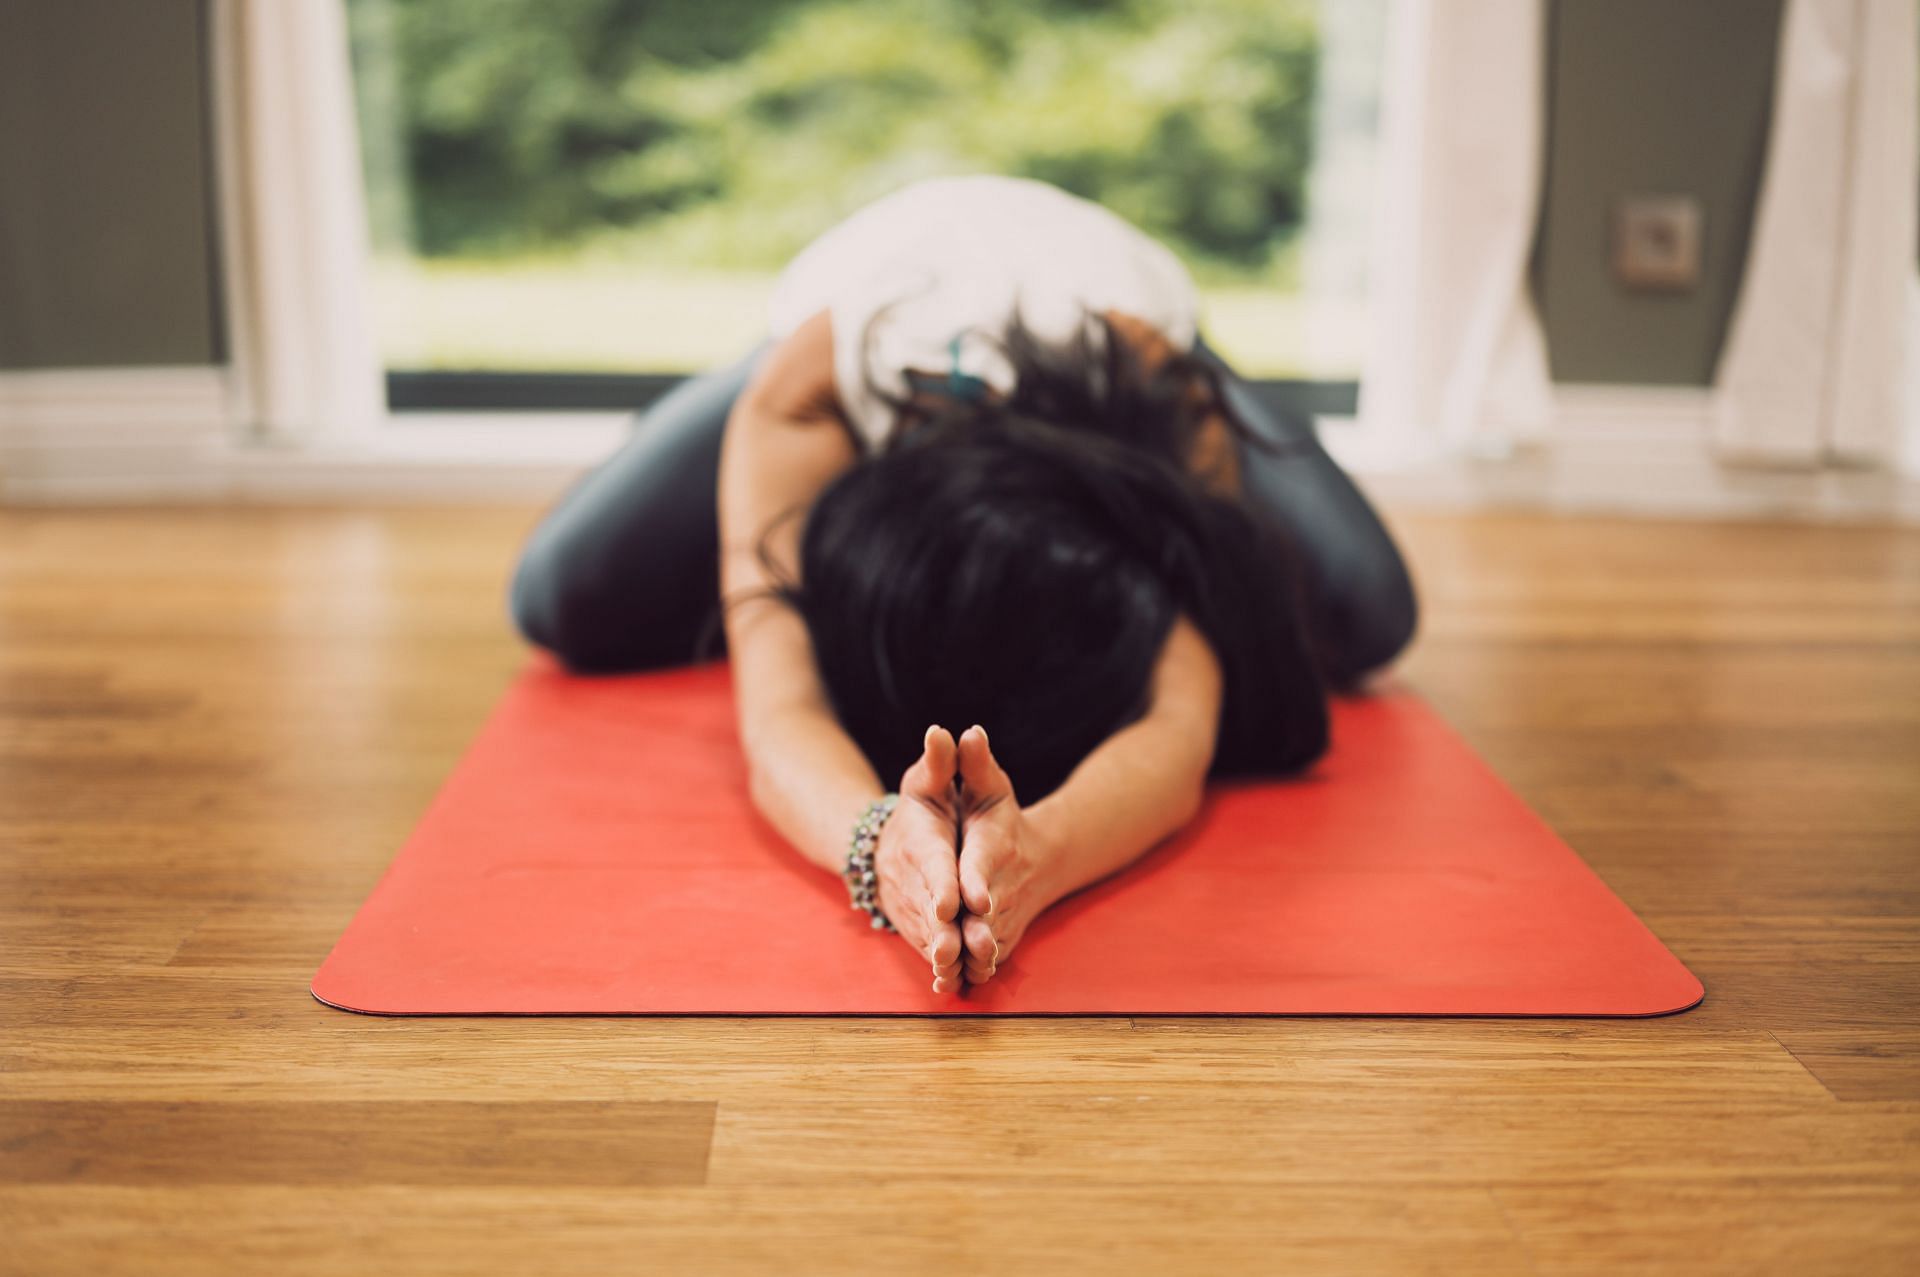 Here are the best yoga poses for strength and focus! (Image via unsplash/Conscious Design)